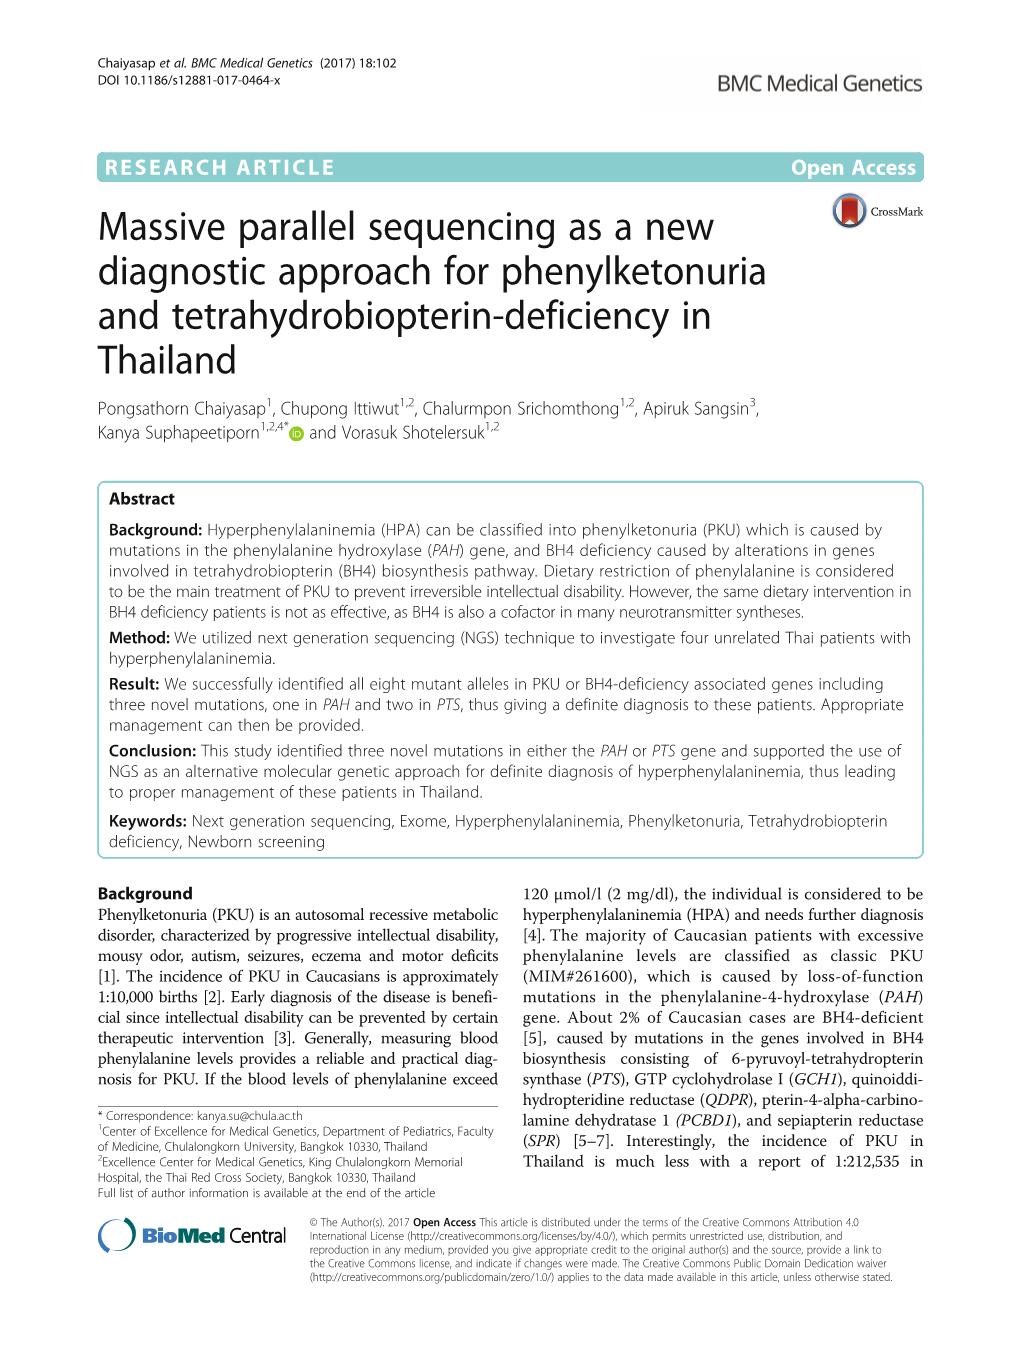 Massive Parallel Sequencing As a New Diagnostic Approach For